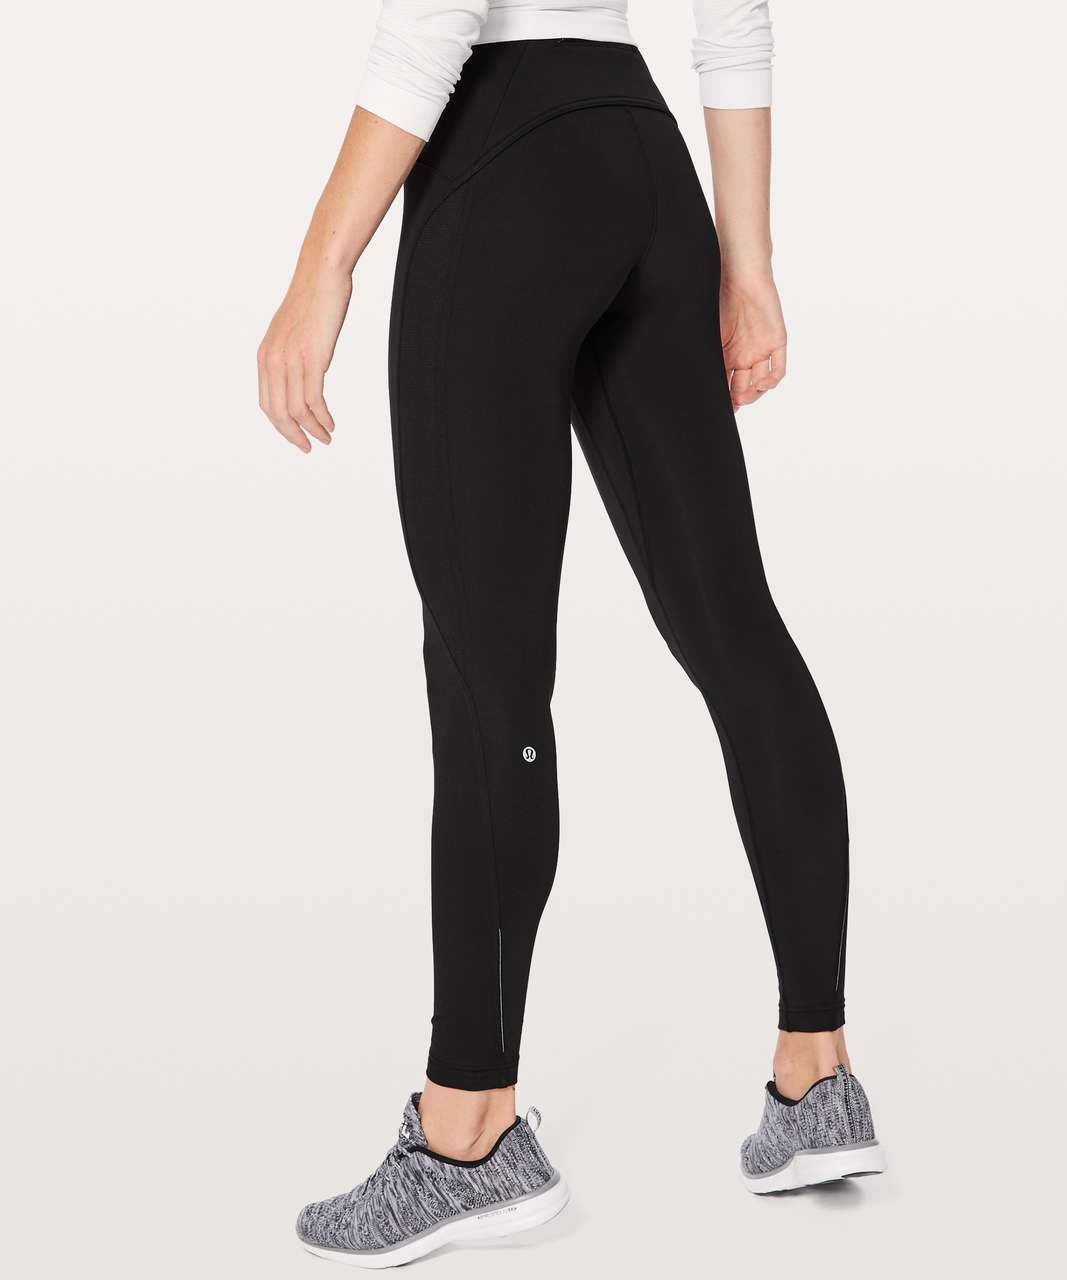 These under-$30 fleece-lined leggings are 'as good as Lululemon